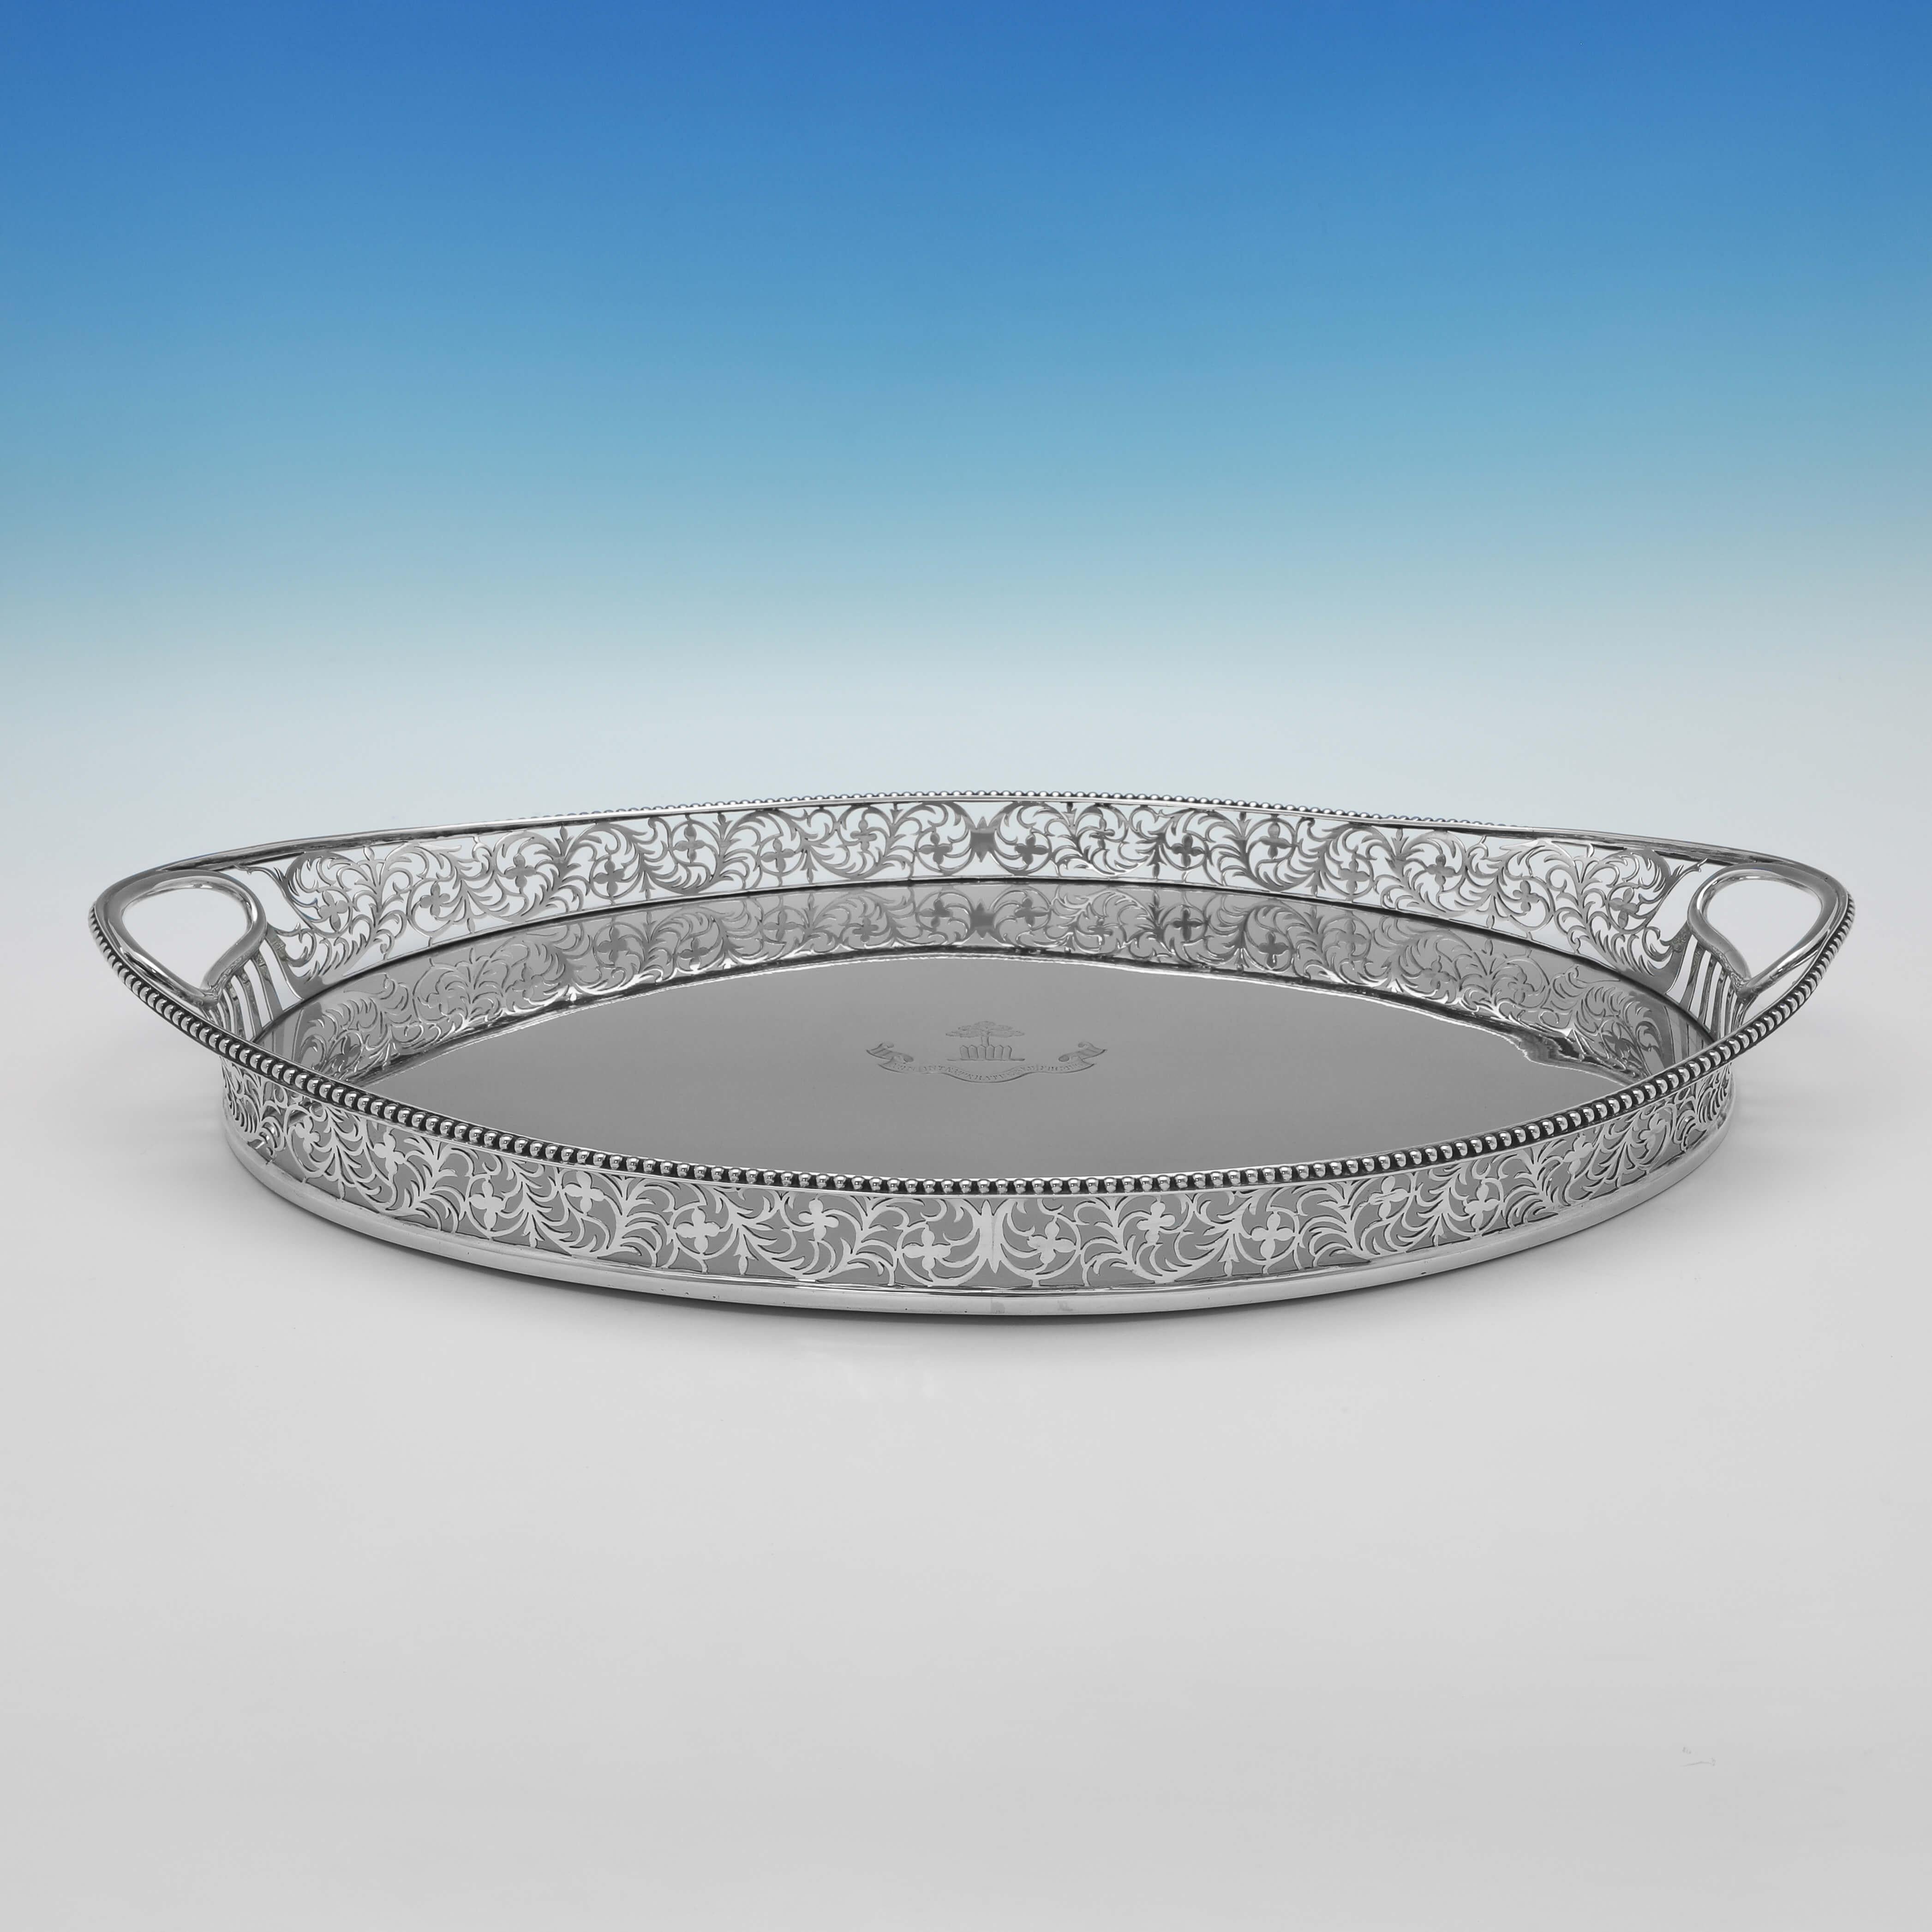 Hallmarked in London in 1900 by Charles Stuart Harris, this attractive, Antique Sterling Silver Gallery Tray, features a pierced and decorative gallery border, and an engraved crest and motto to the centre. 

The tray measures 2.5